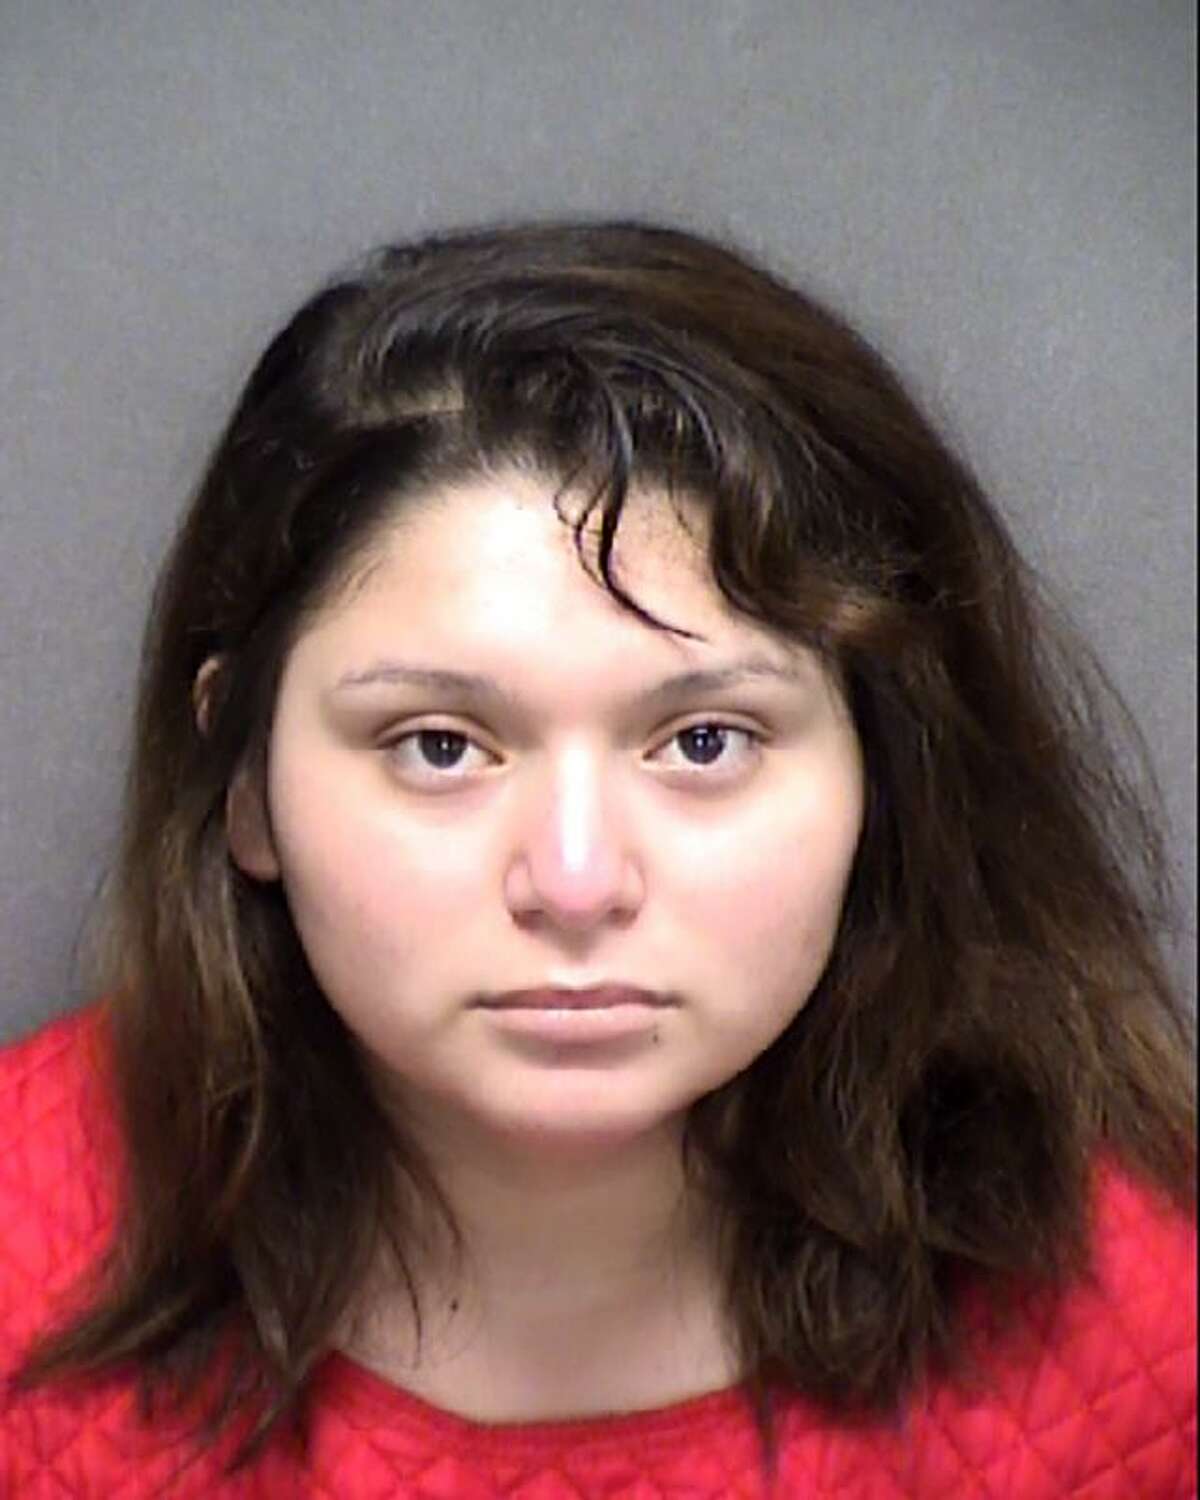 D'Lanny Reaneille Chairez, 20, was indicted Tuesday on a charge of tampering with evidence. She was arrested in mid-March on a charge of abandoning or endangering a child. Her toddler, James Avi Chairez, is still missing.